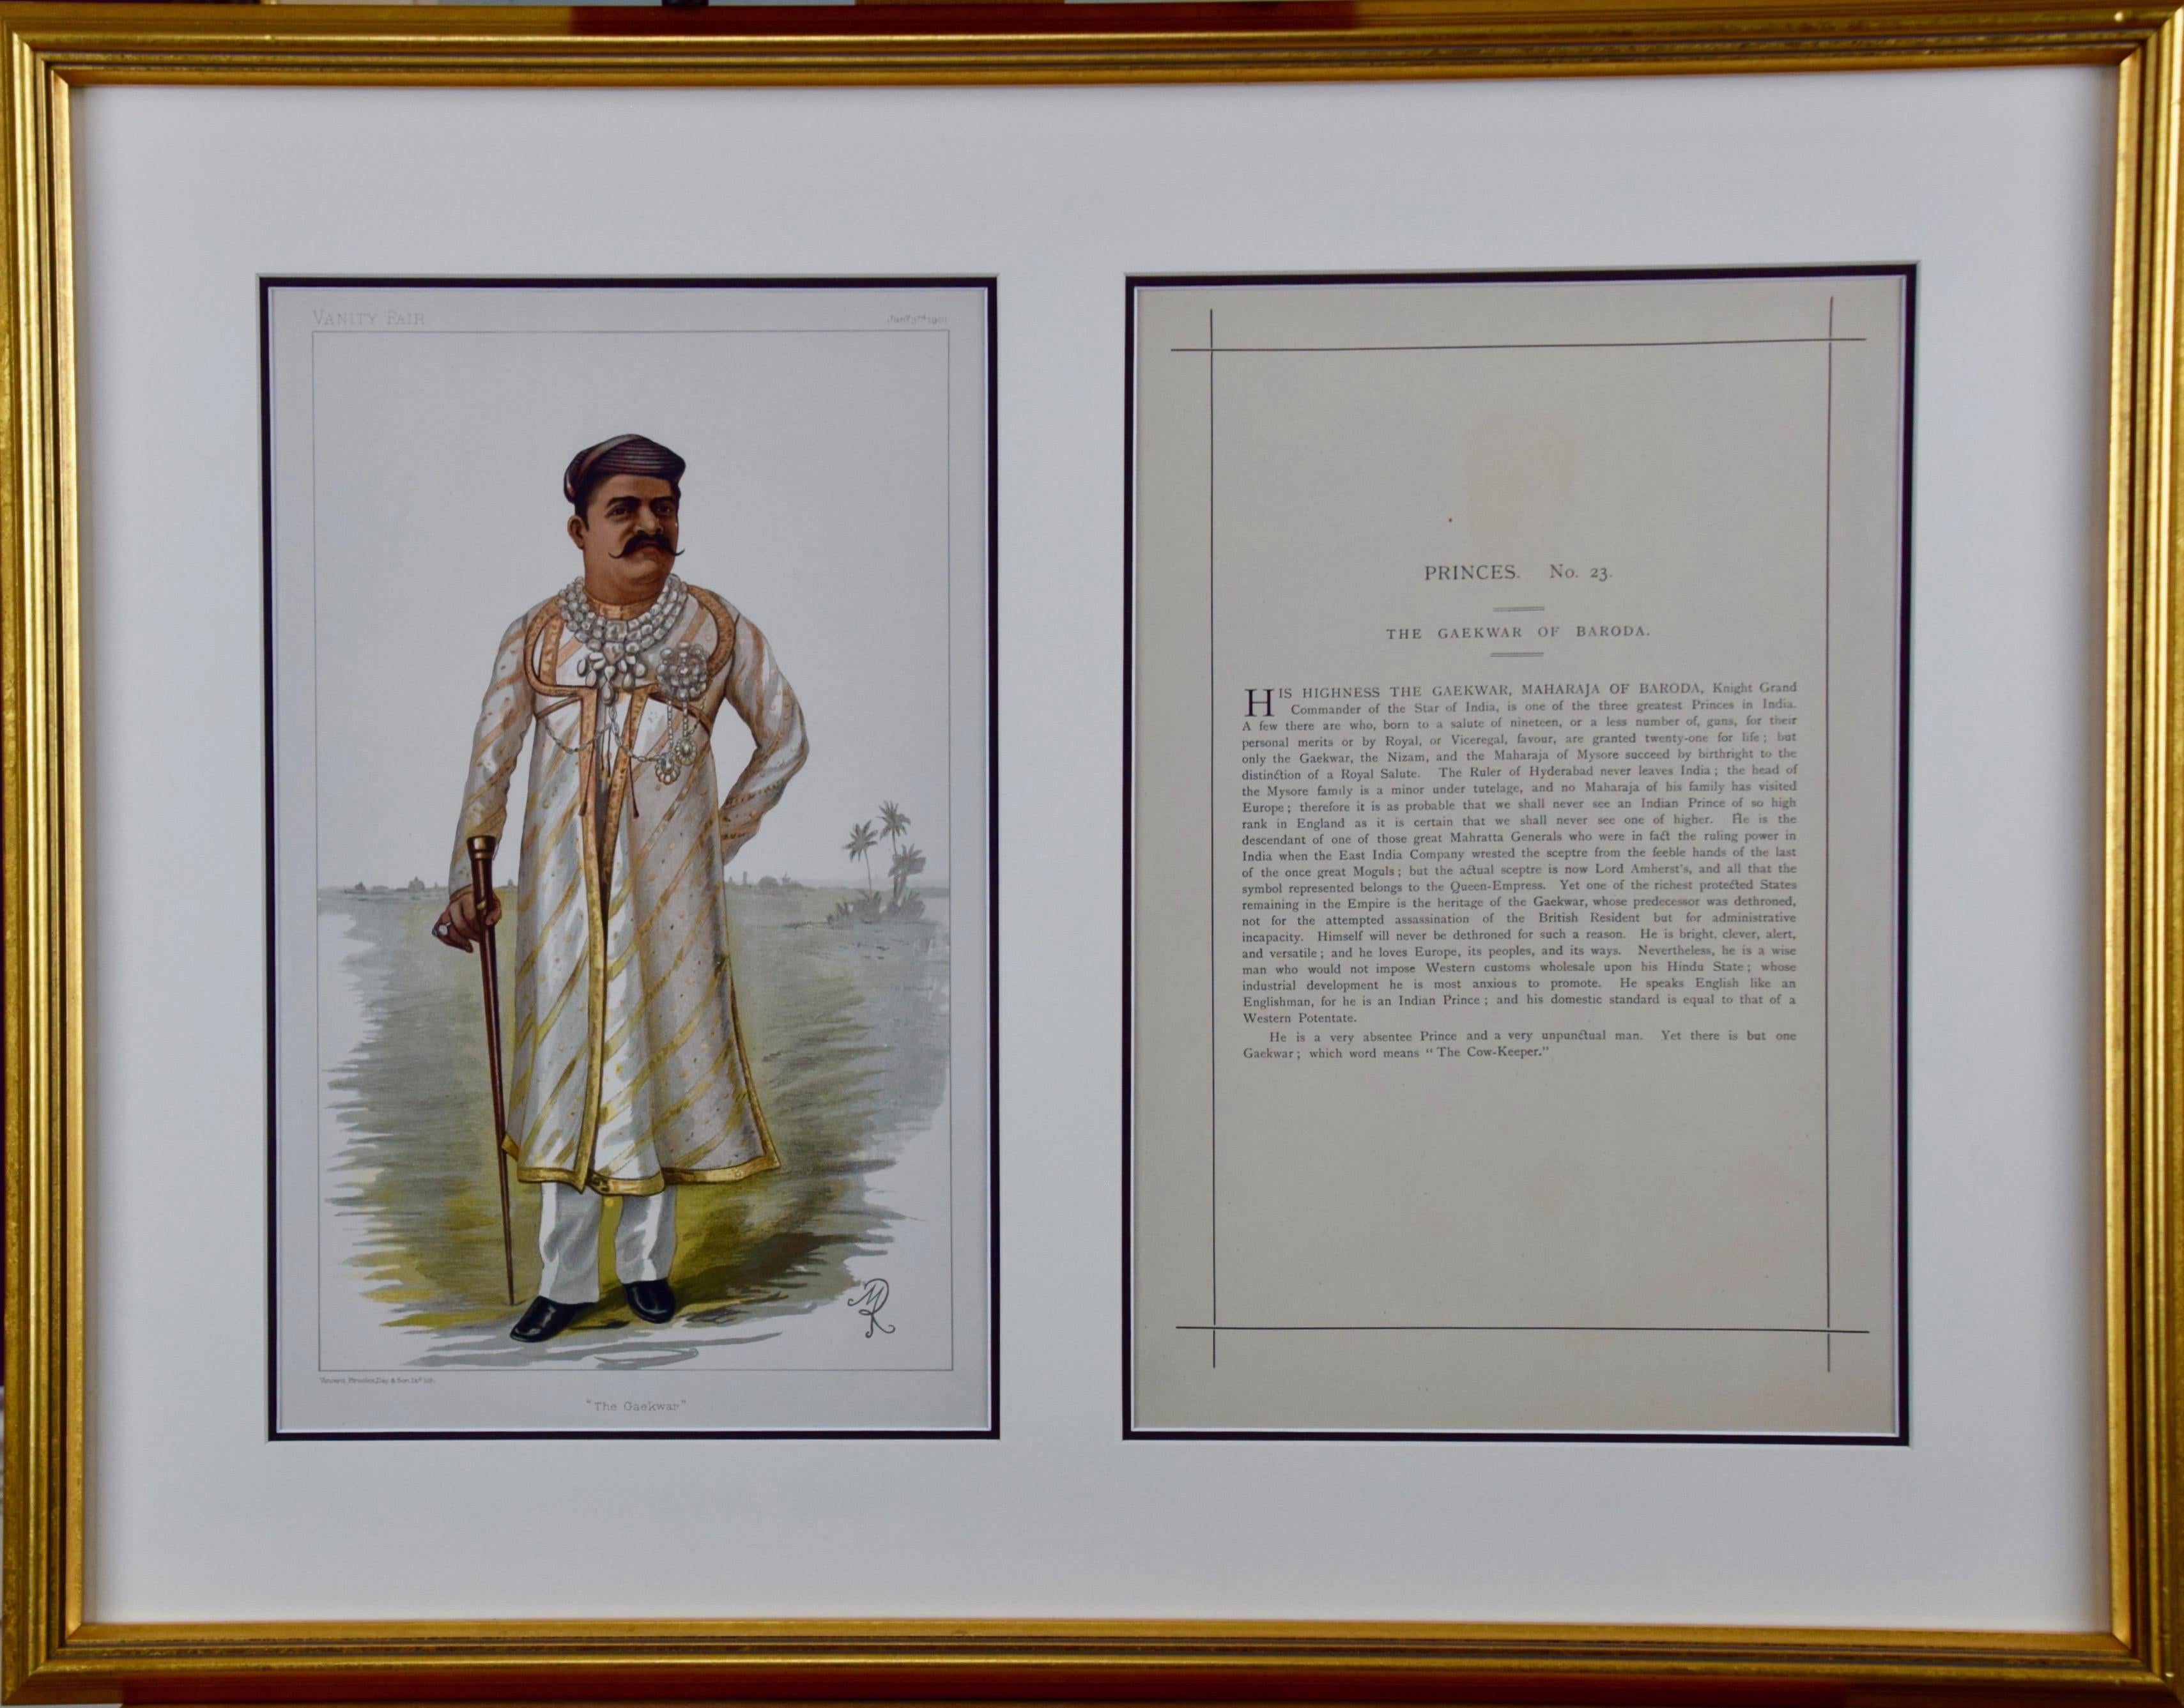 Unknown Landscape Print - Colored Vanity Fair Caricature of the "Gaekwar of Baroda" (Prince of India)  